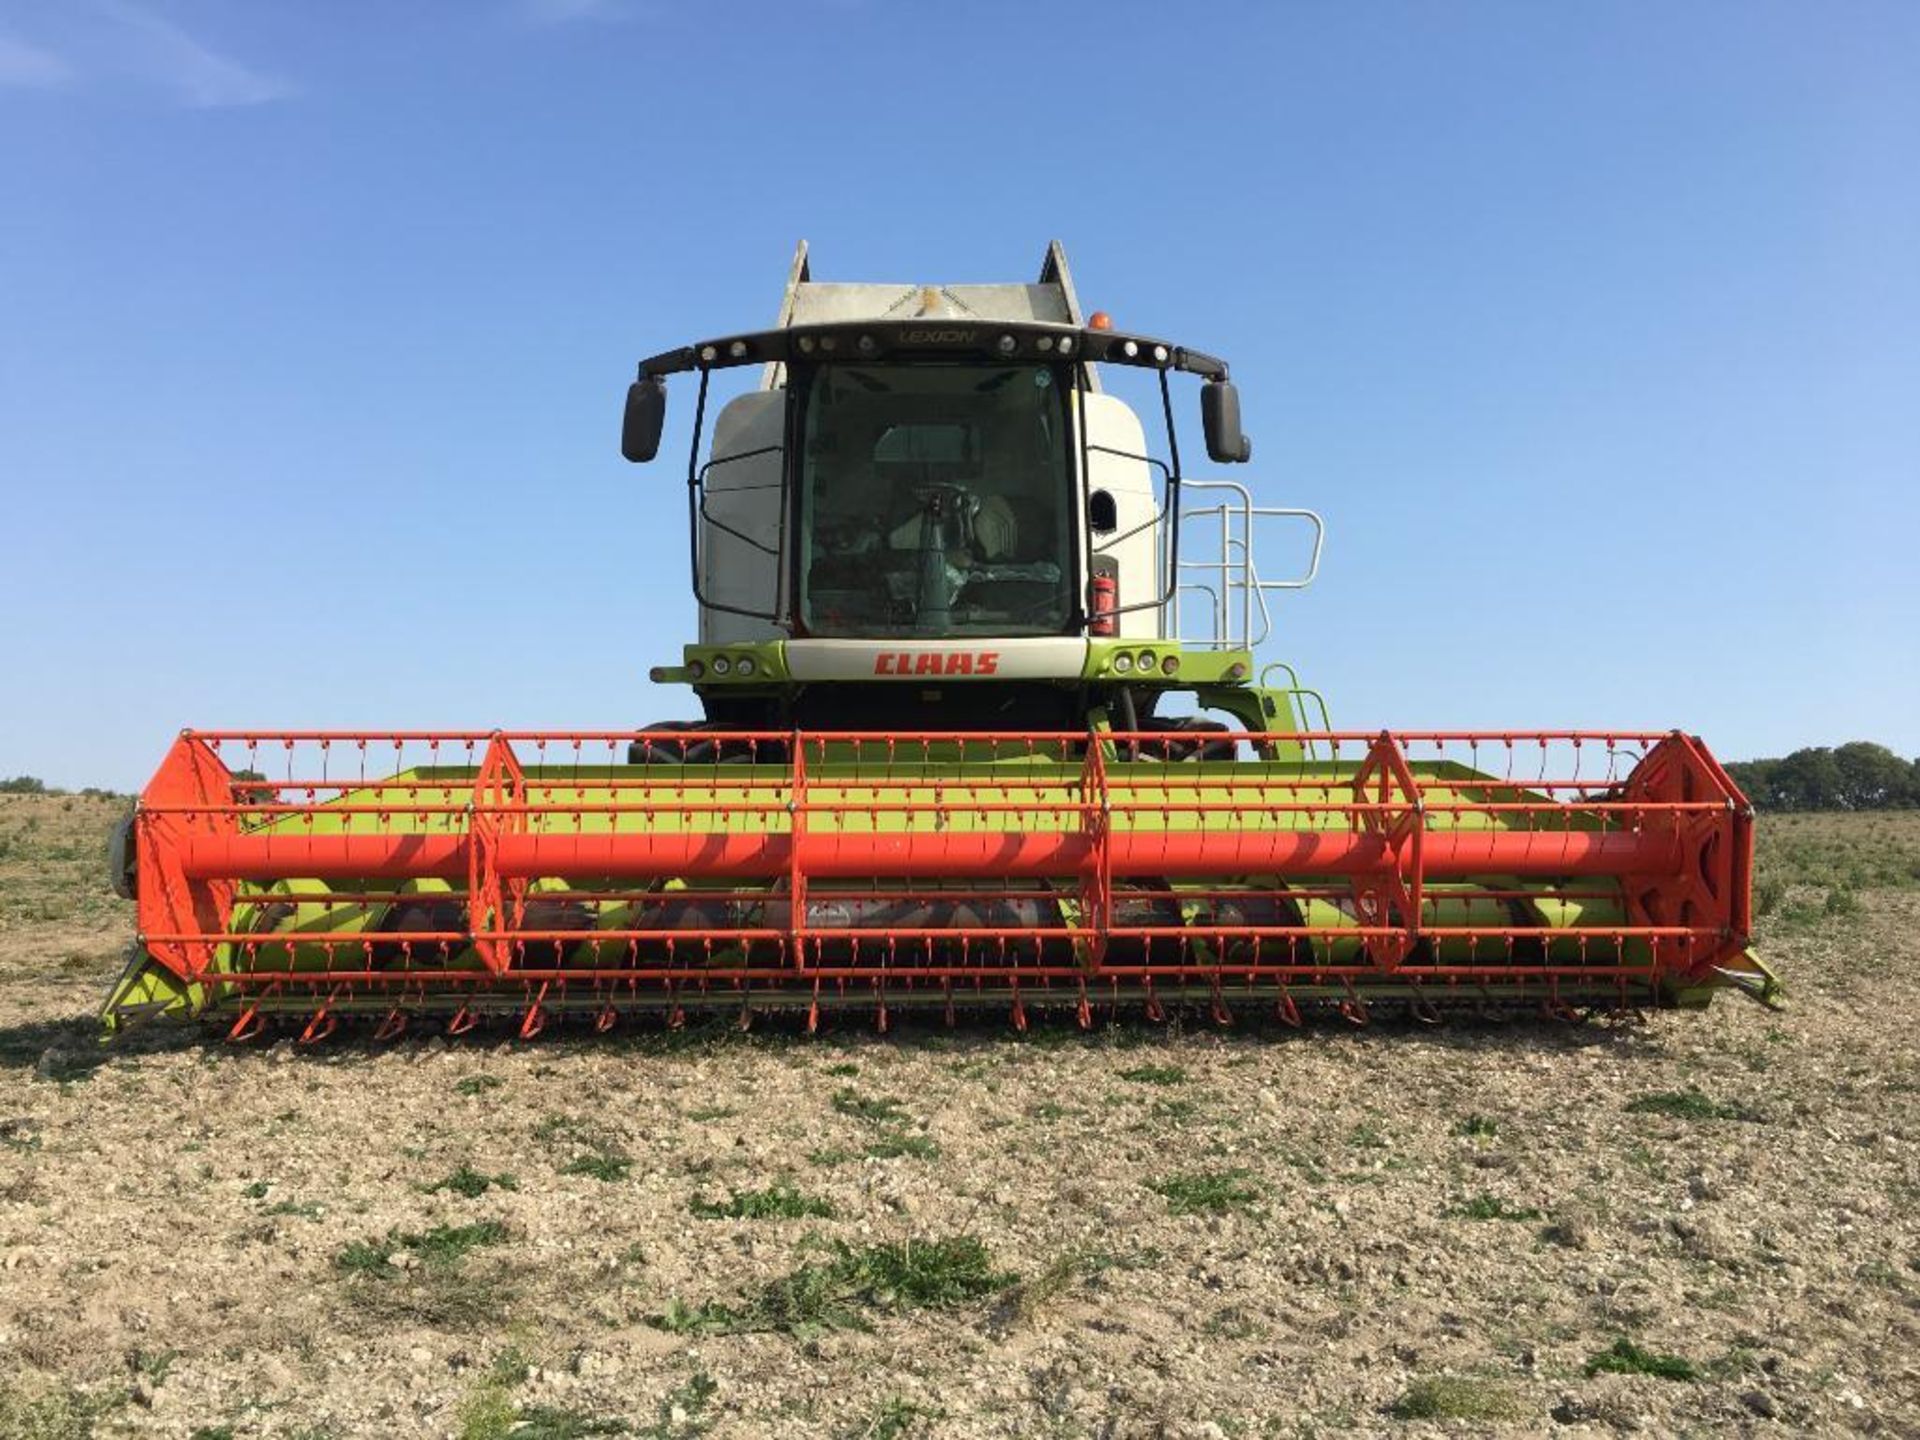 2014 Claas Lexion 650 combine harvester with V660 (22ft) header and header trolley with side knife a - Image 14 of 26